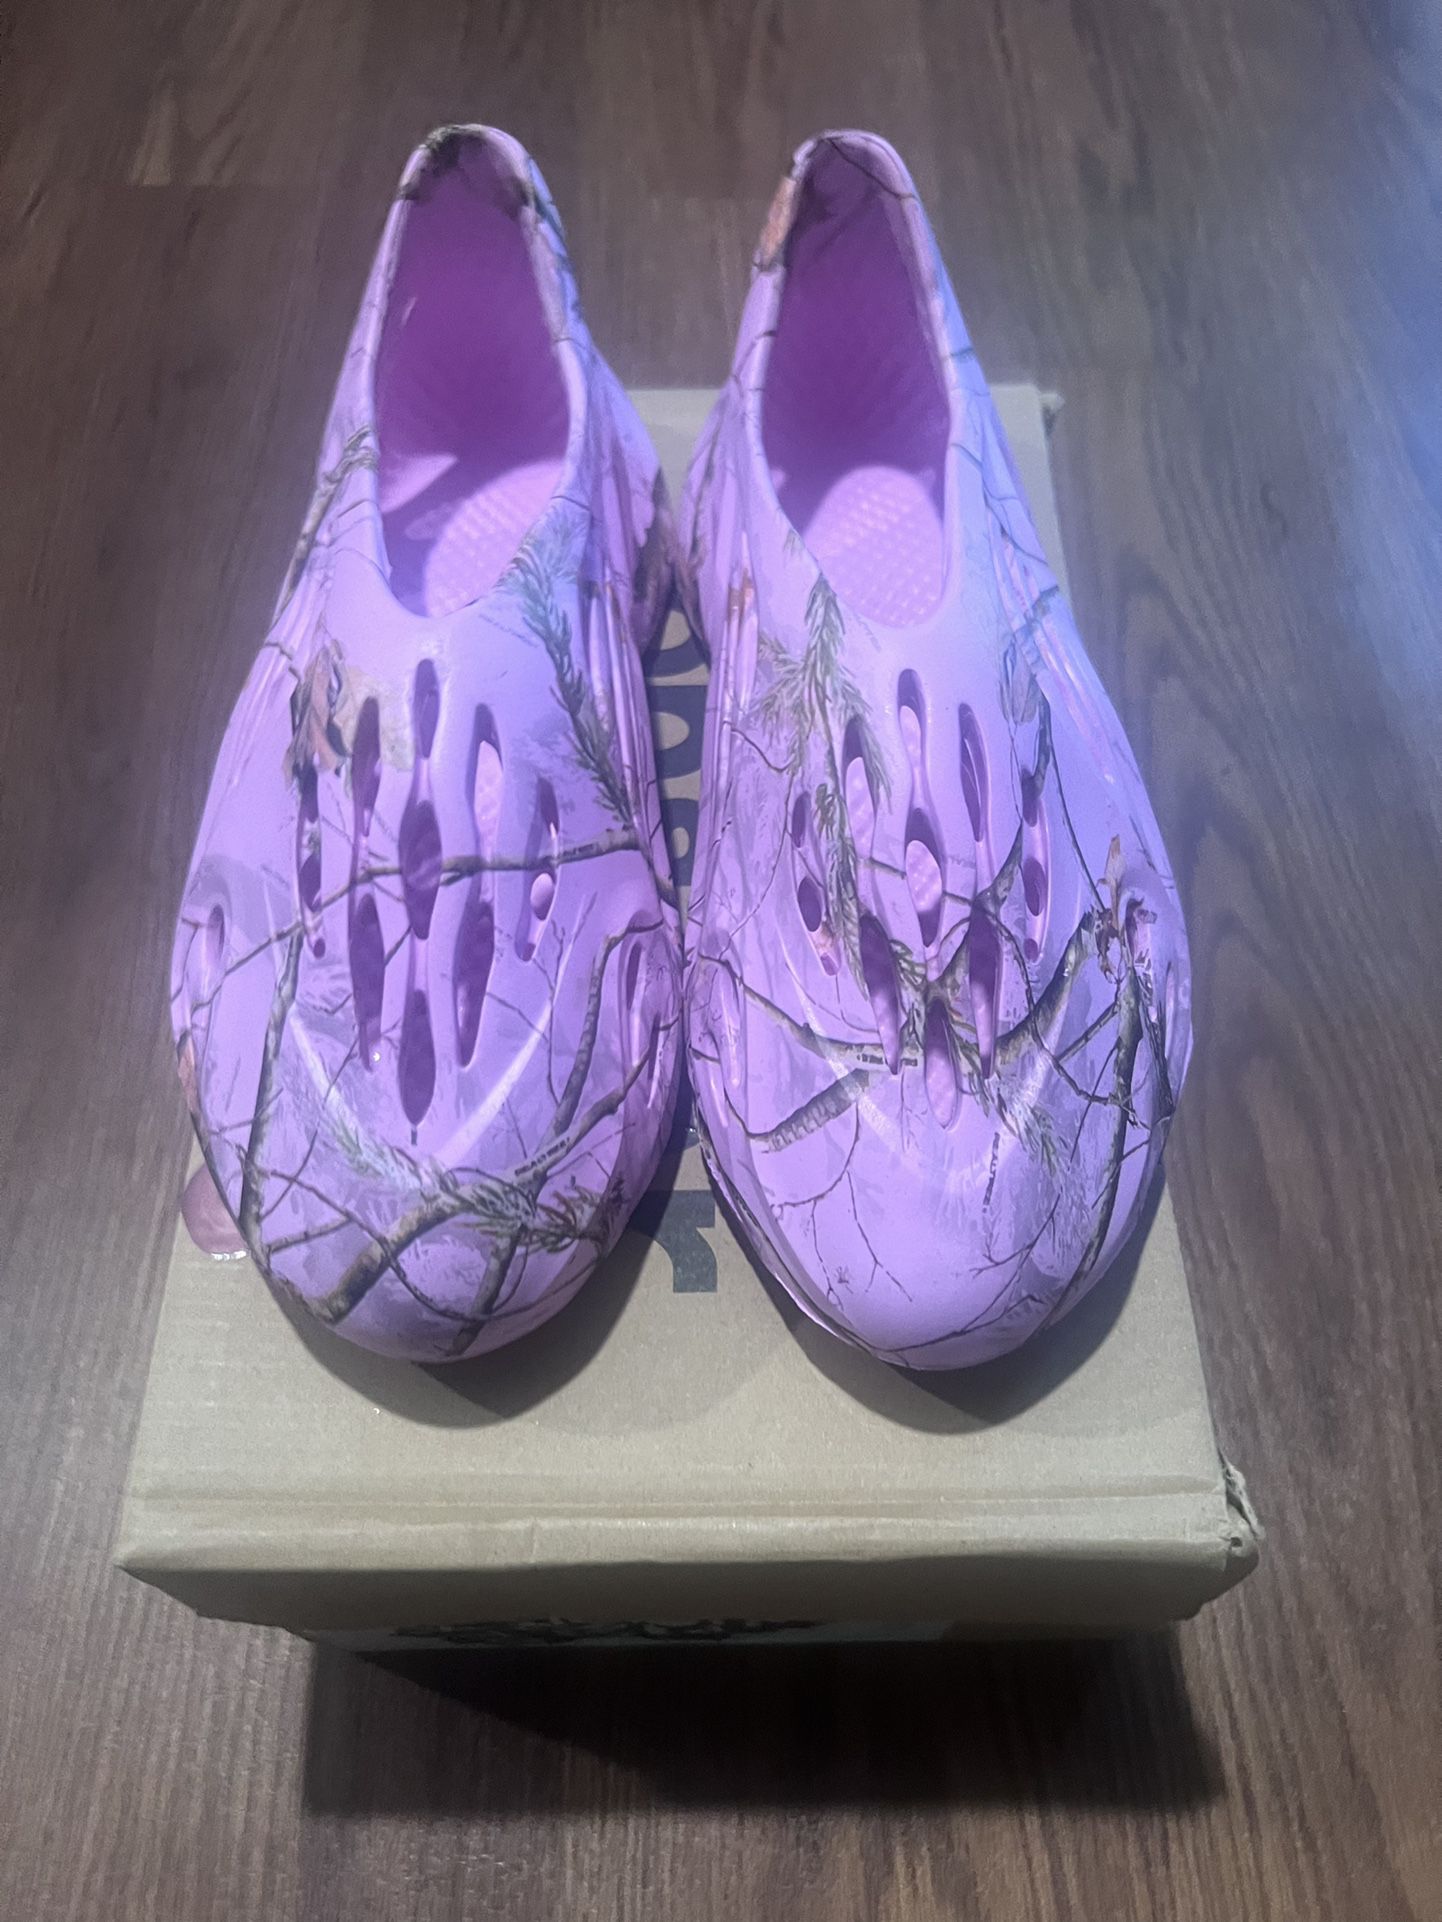 Imran Potato Pink Lobster Foams for Sale in Madera, CA - OfferUp